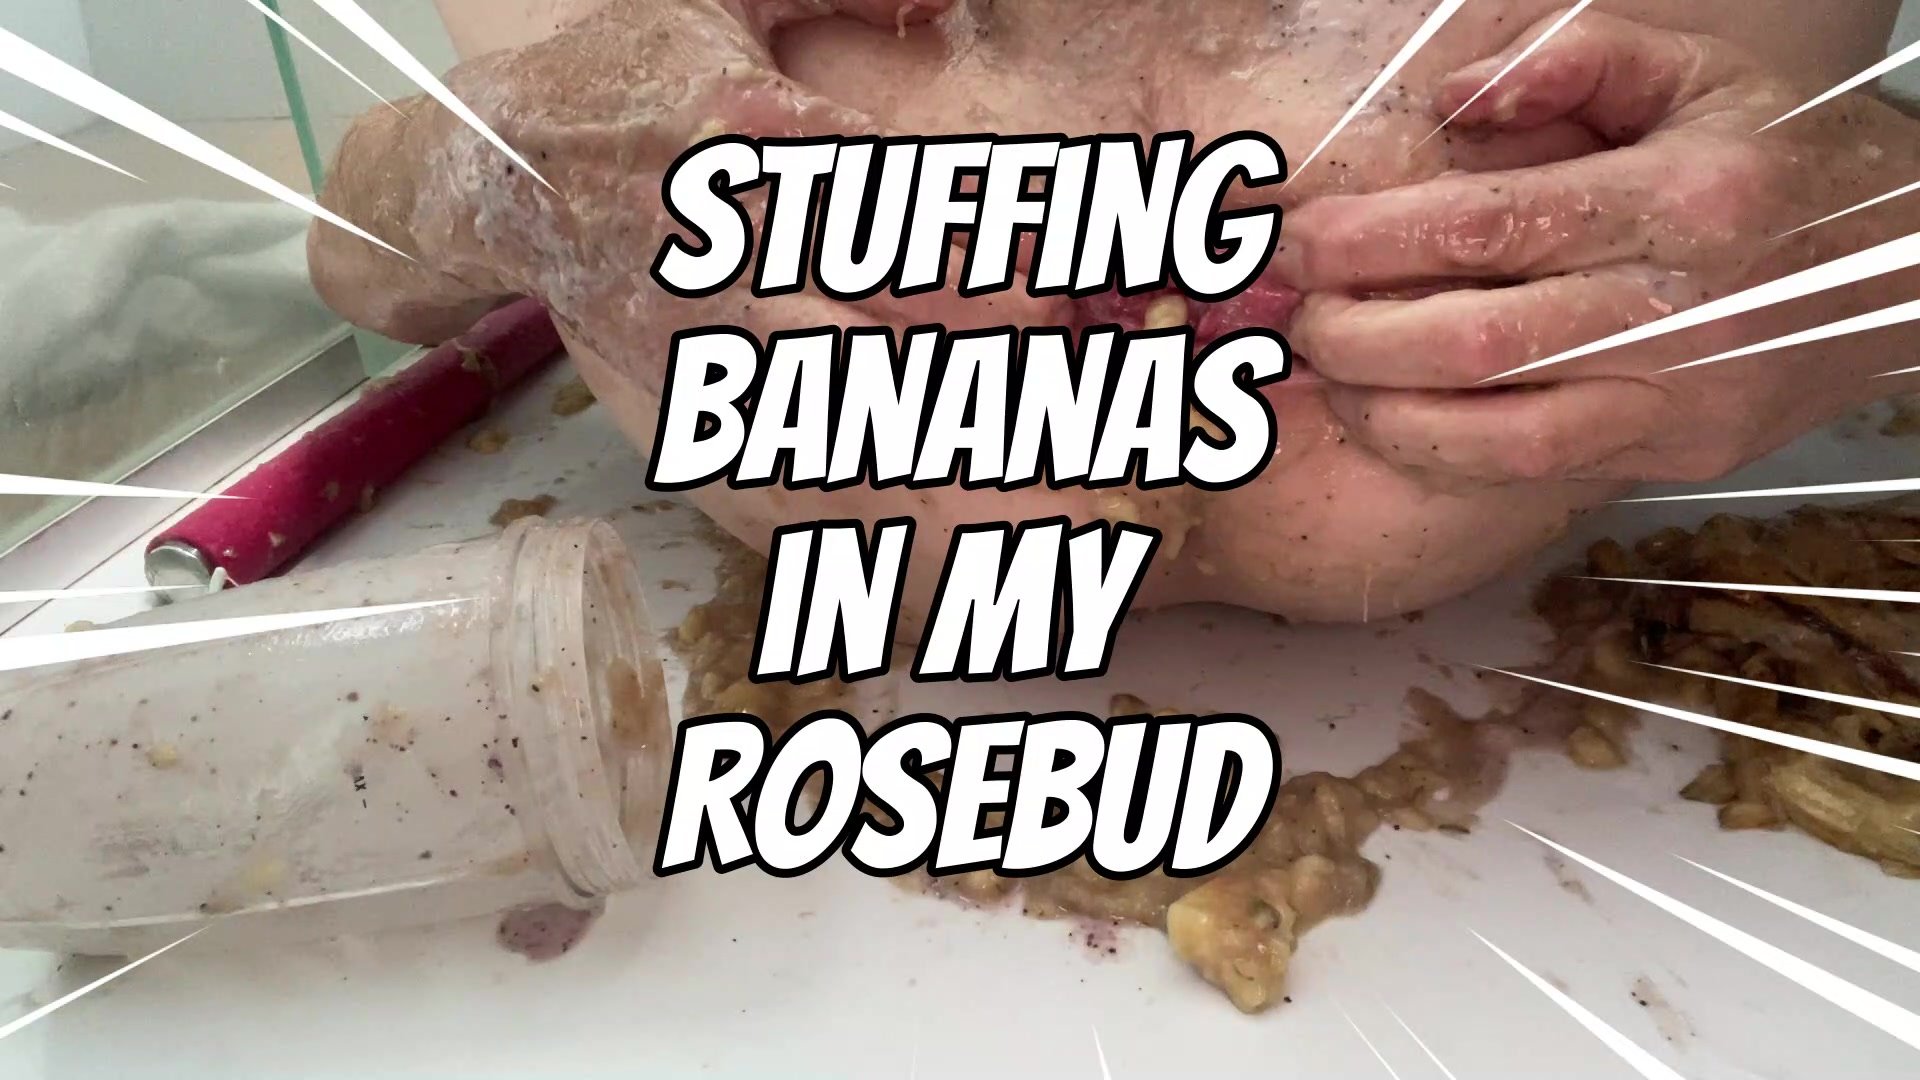 Stuffing Bananas in My Asshole